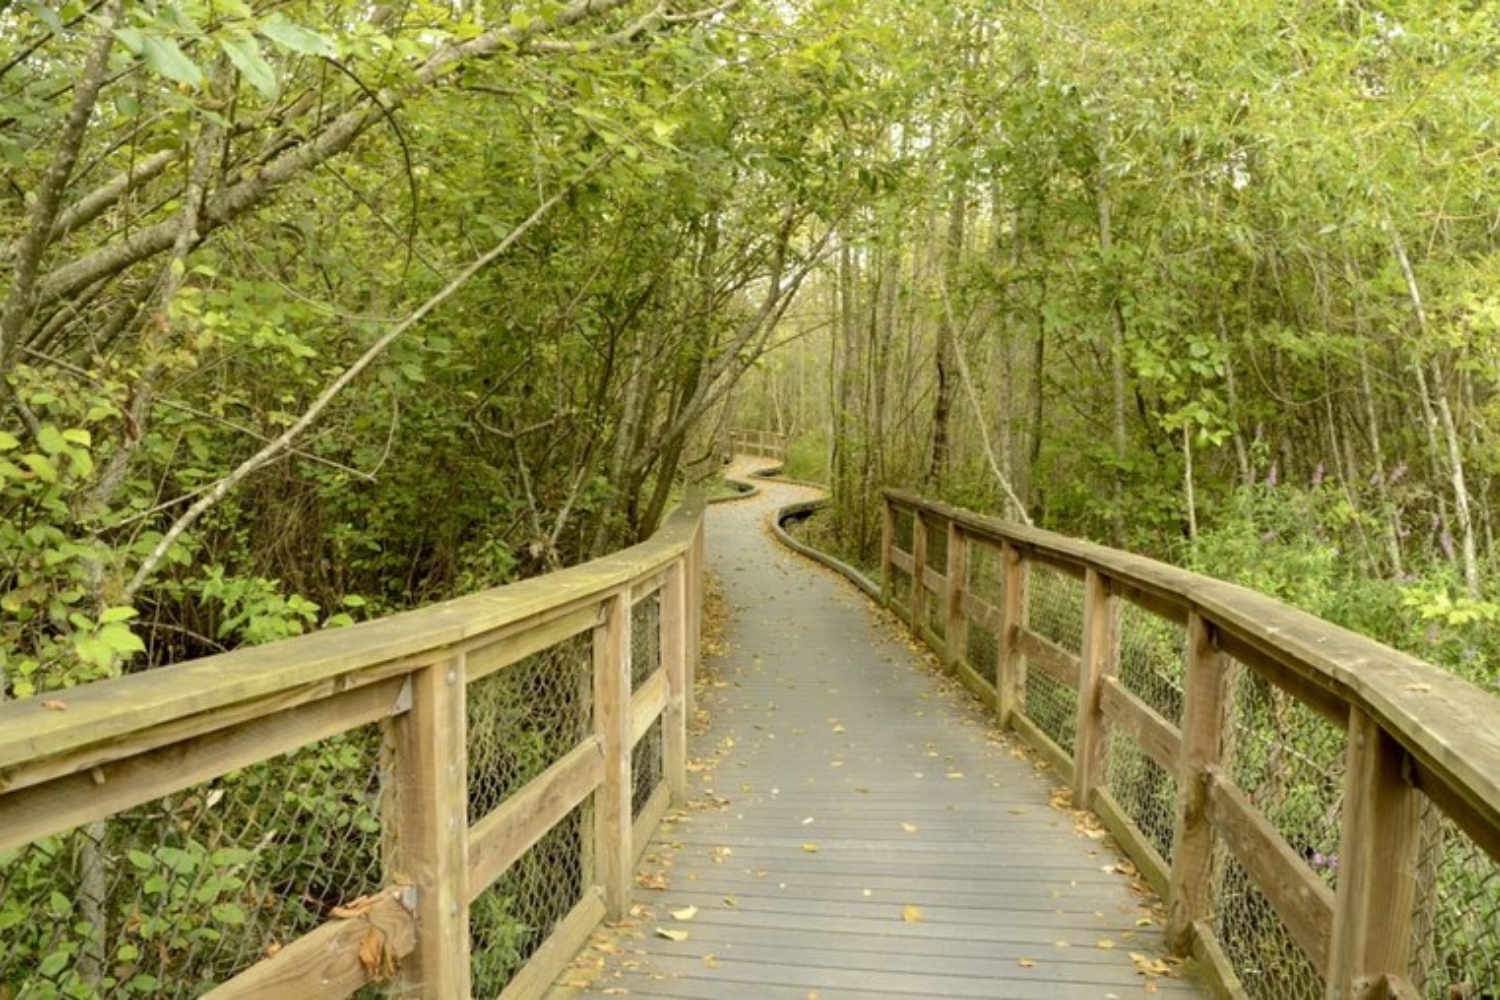 The boardwalk on Narbeck Wetland Sanctuary. Photo by Greenhorn.